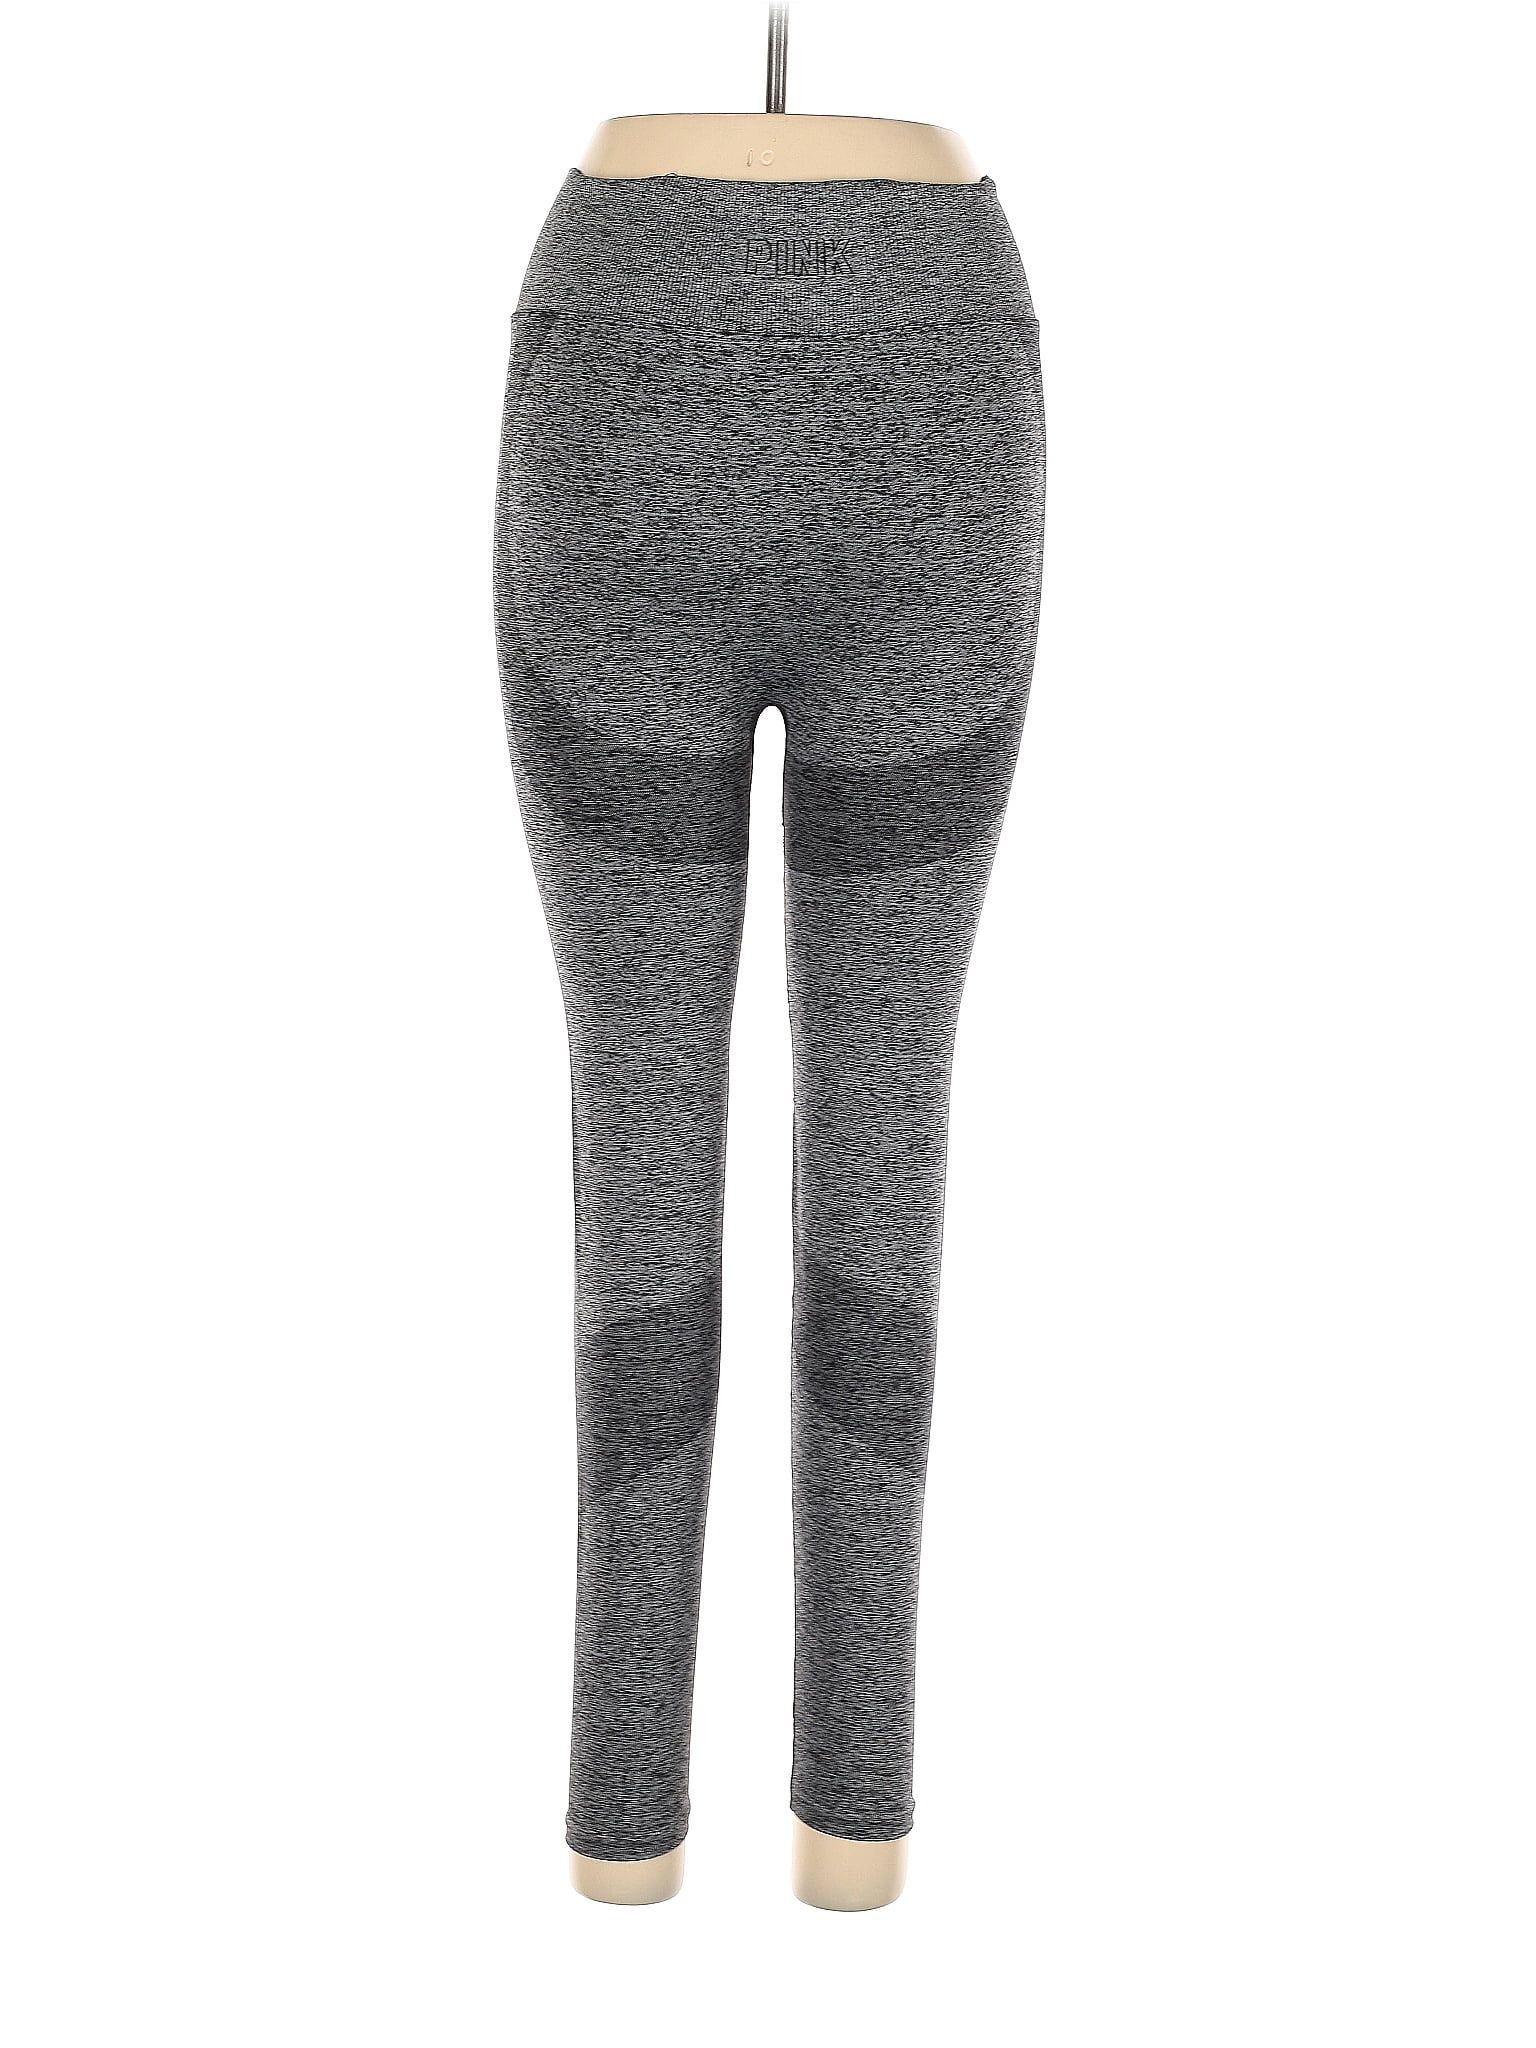 Intimately by Free People Marled Gray Leggings Size XS - 43% off